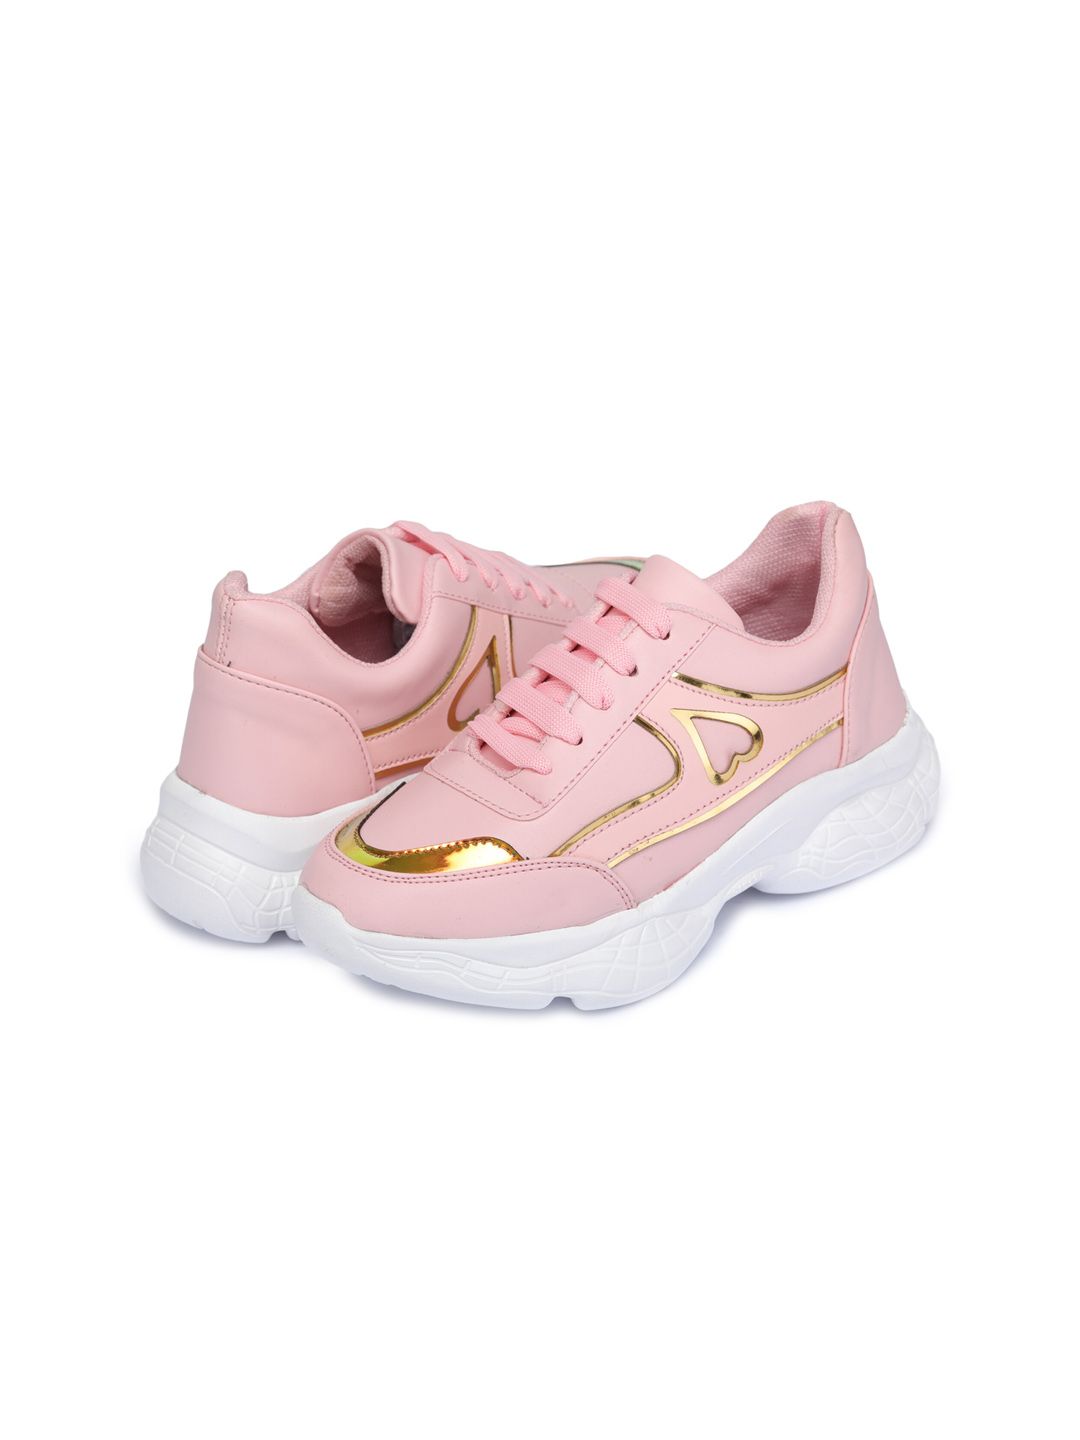 BOOTCO Women Pink Sneakers Price in India